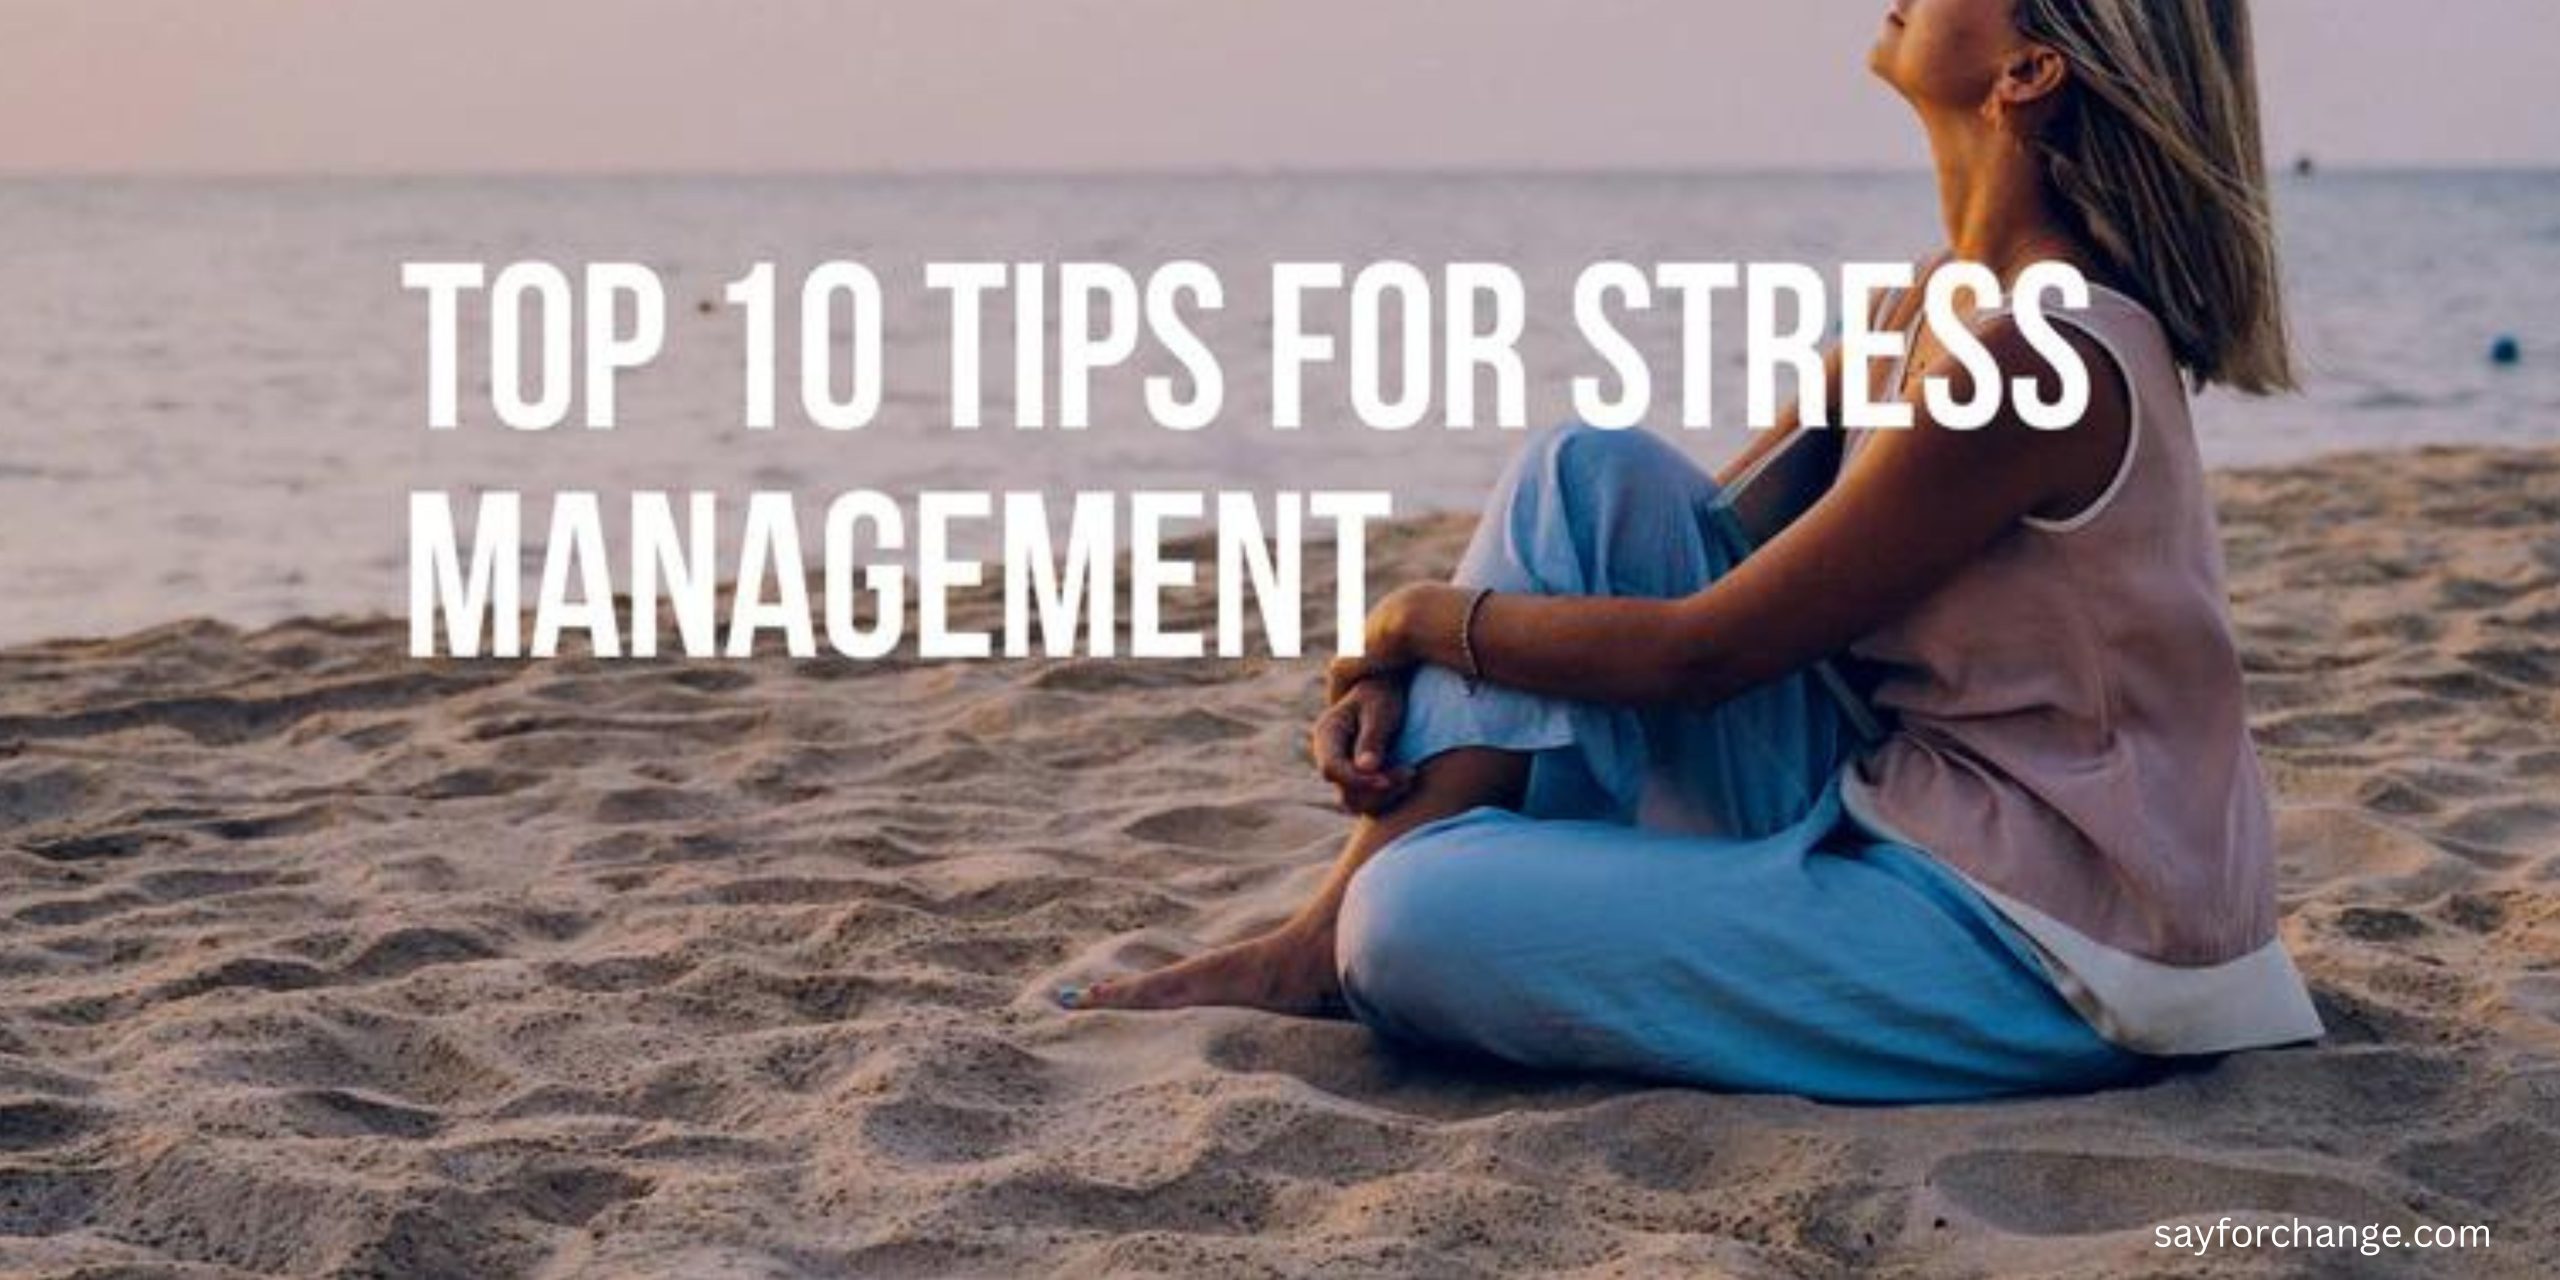 Top 10 Tips for Managing Stress in a Fast-Paced World